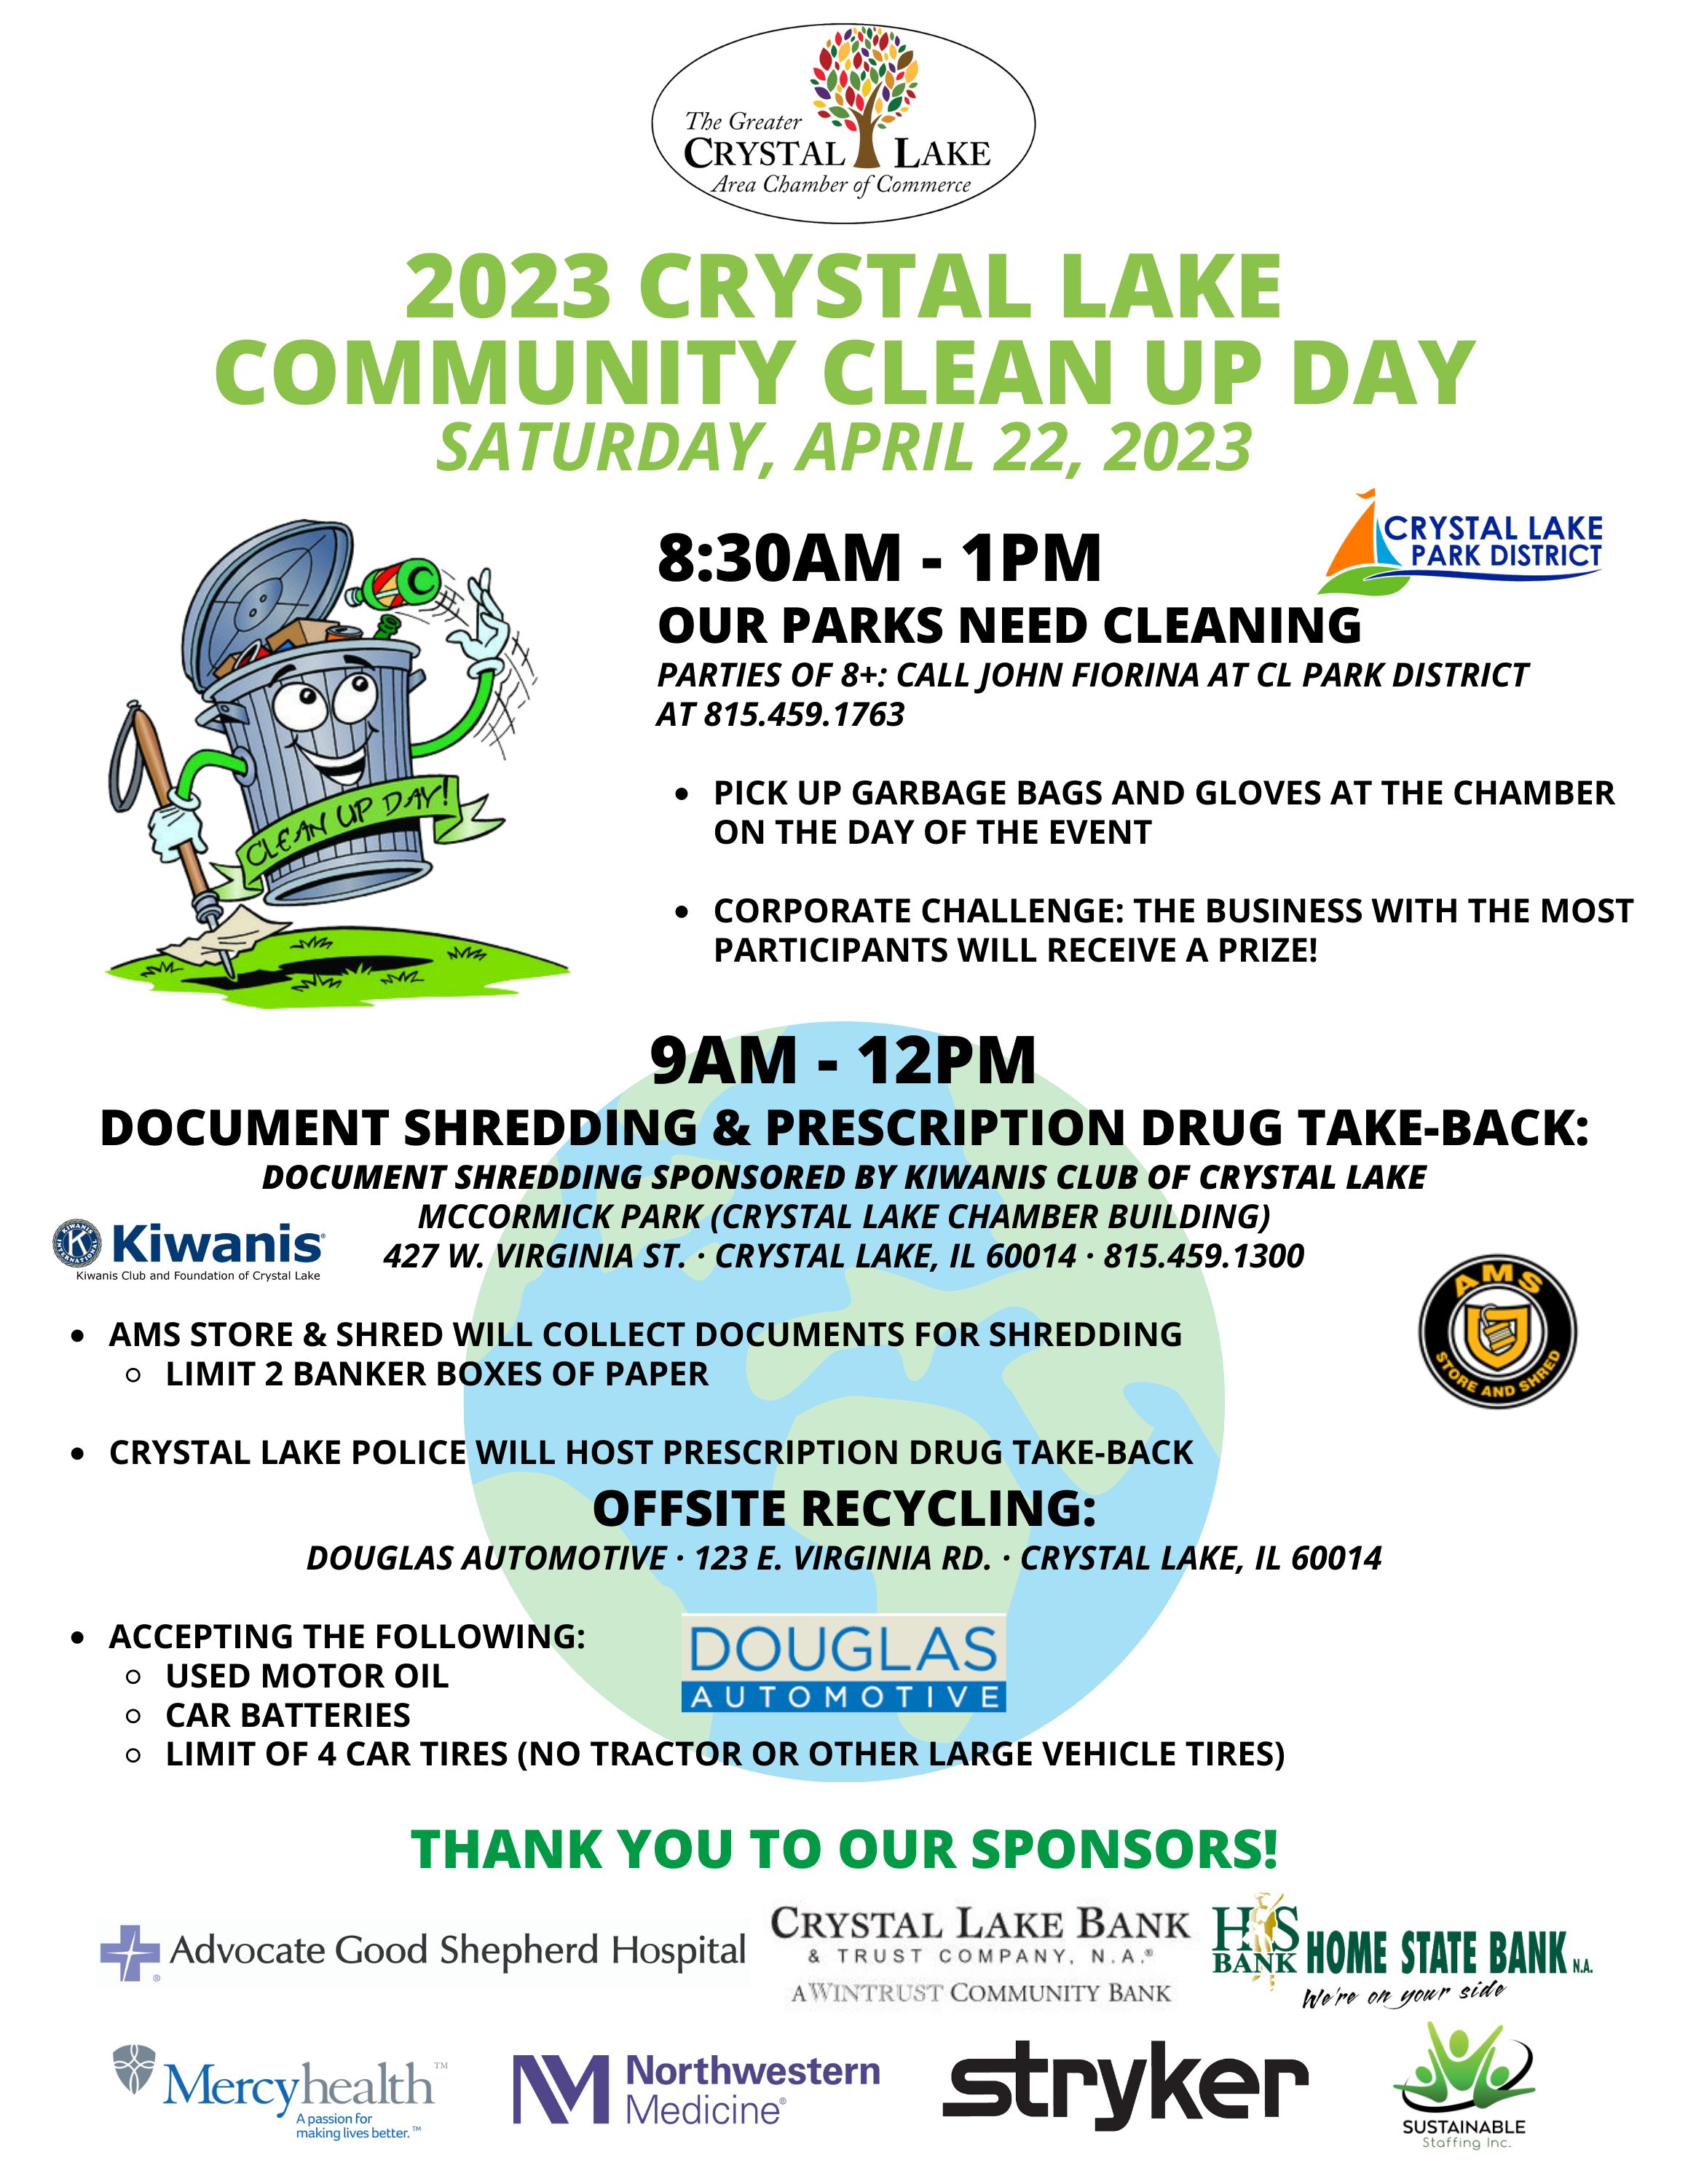 2023 Community Clean Up2